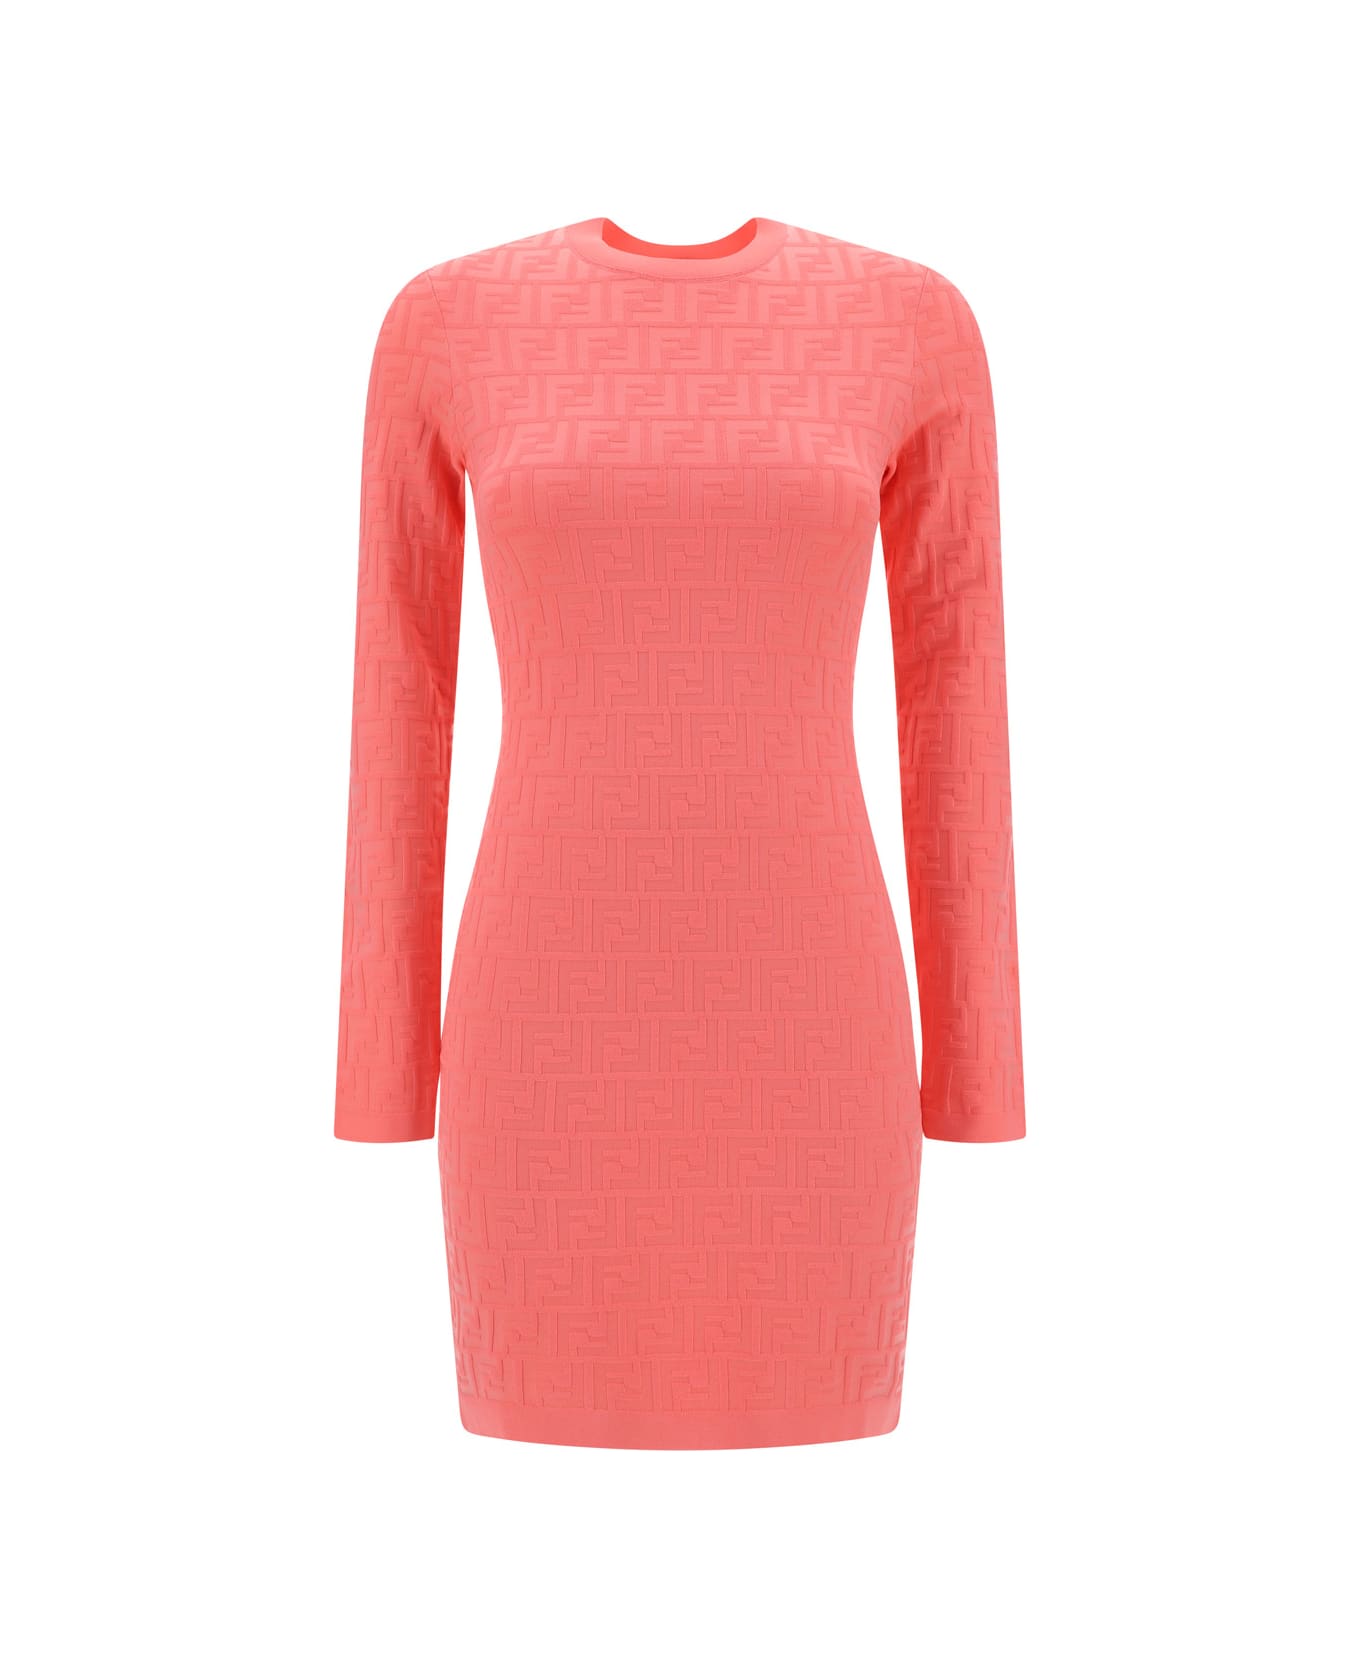 Fendi Fitted Crew-neck Dress - Kissed